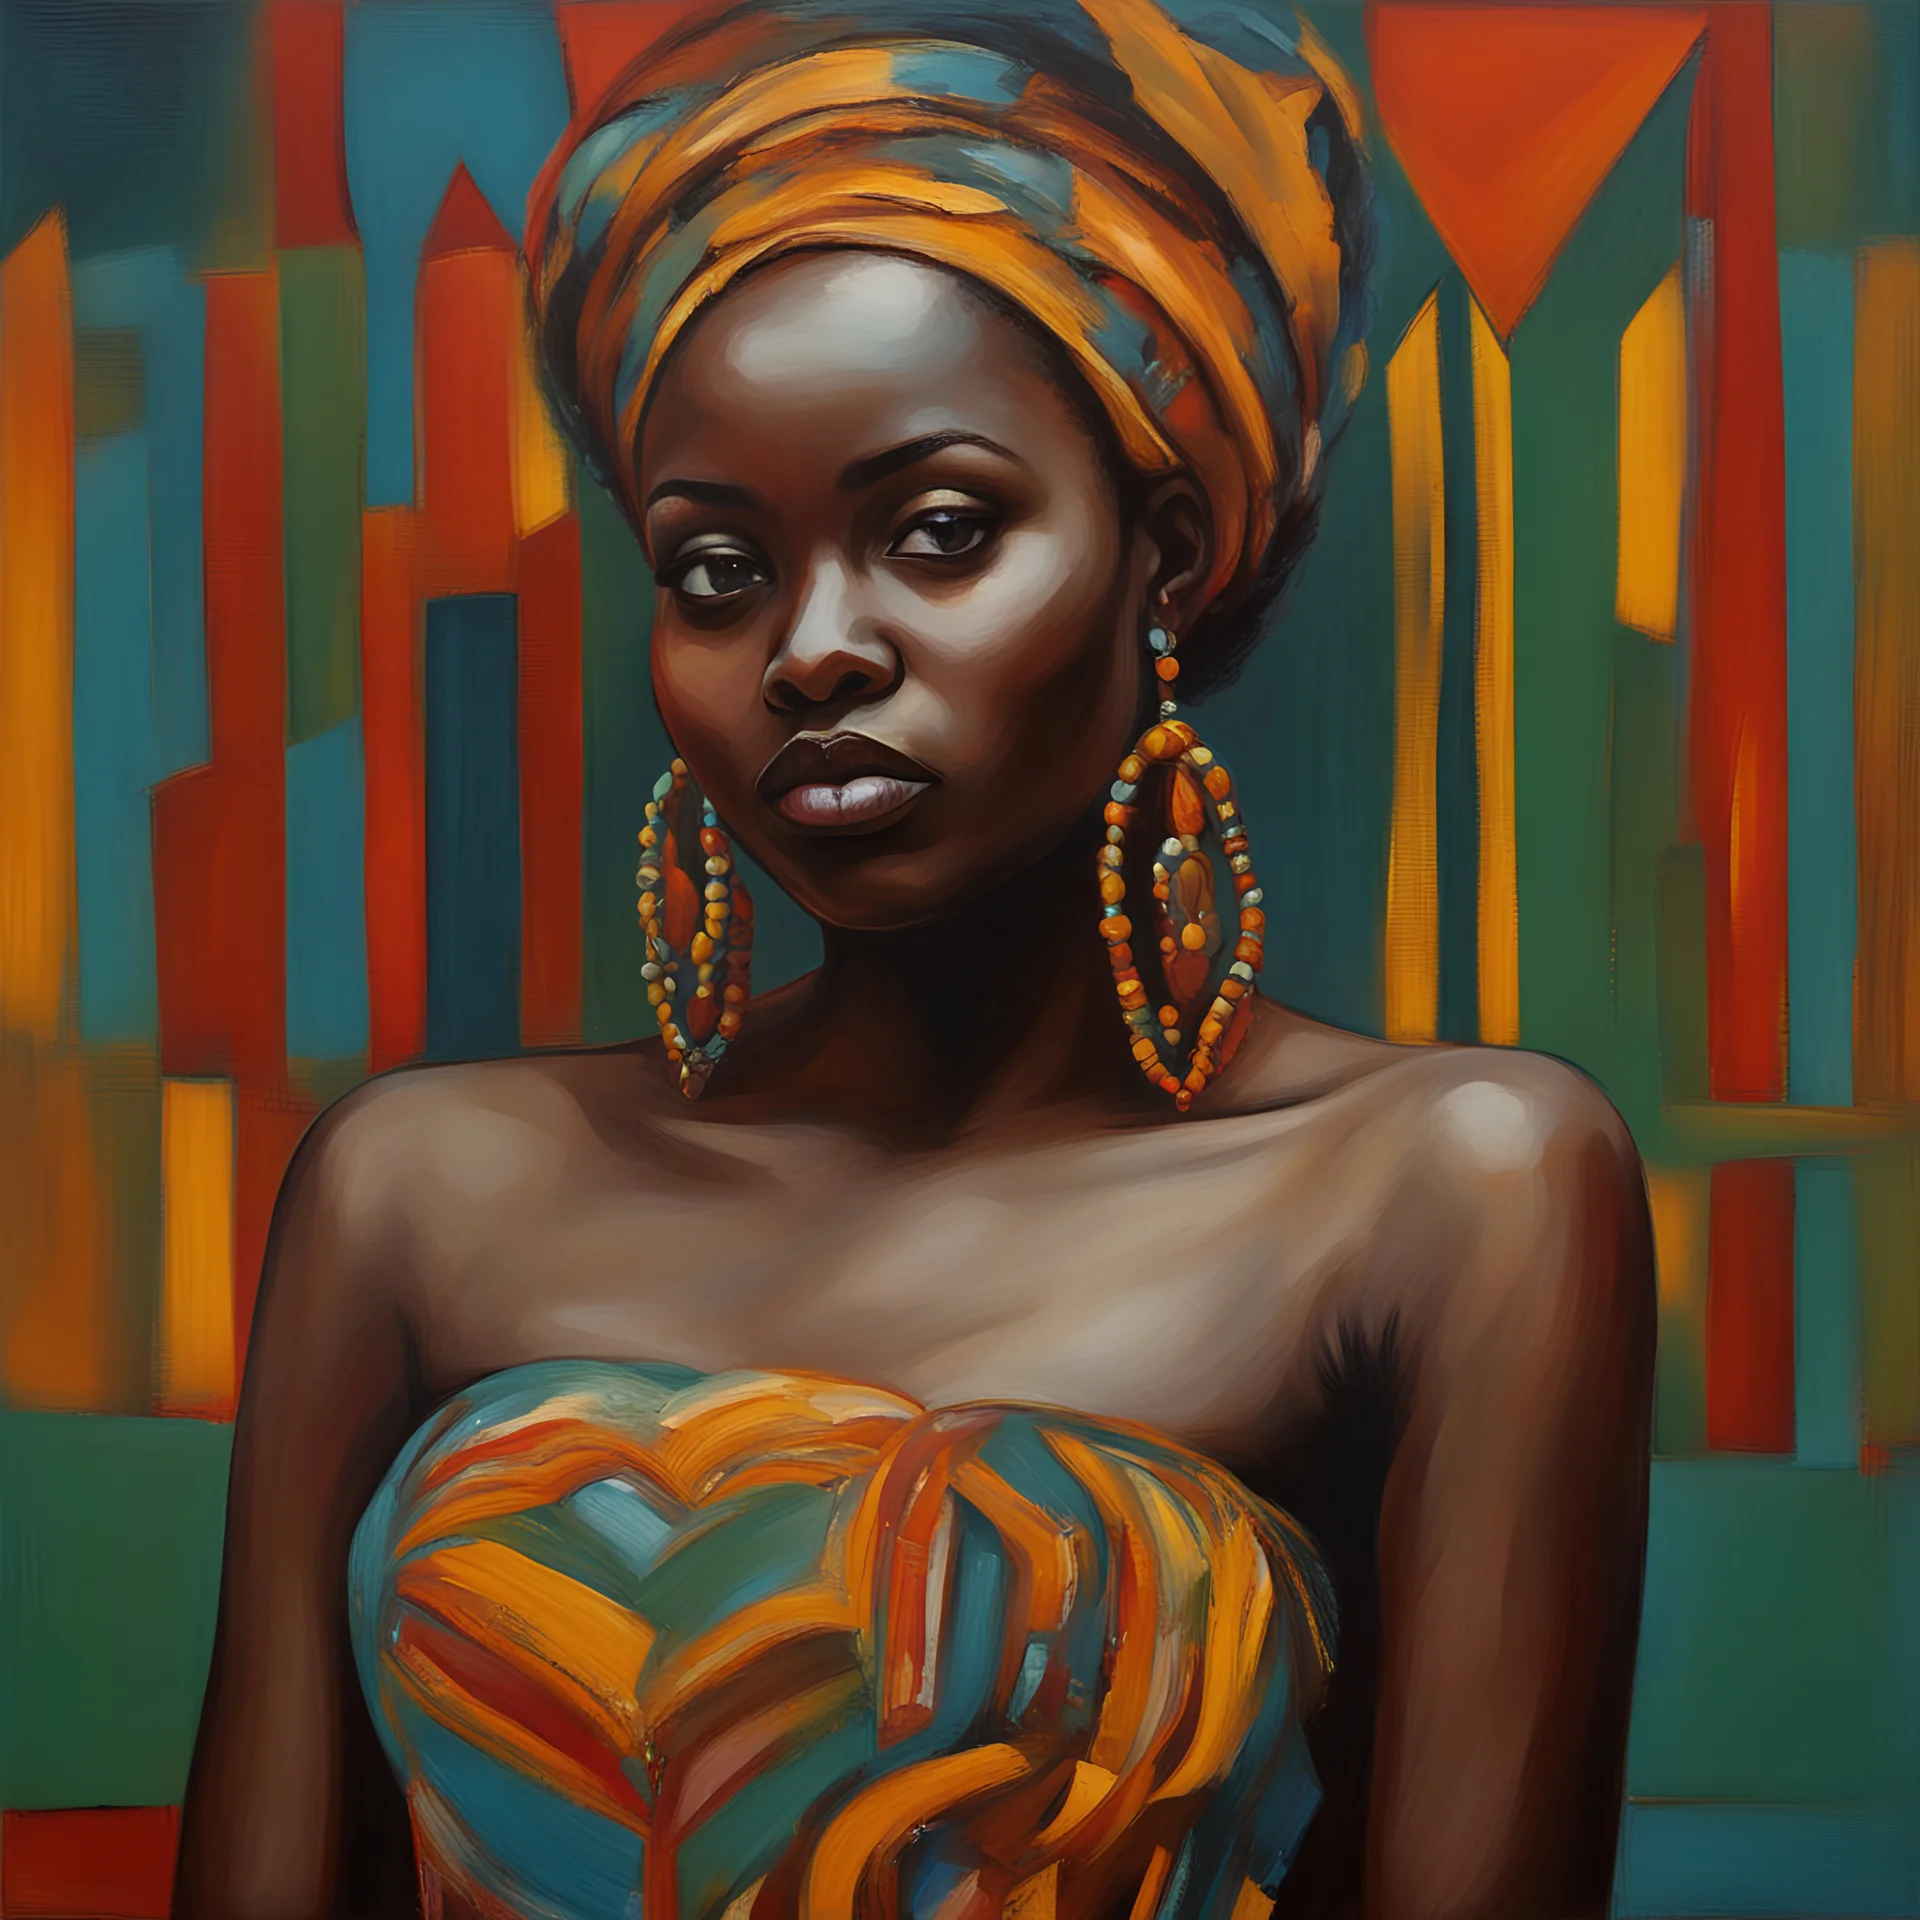 A portrait of a young African woman wearing a tourban painted by expressionist painter